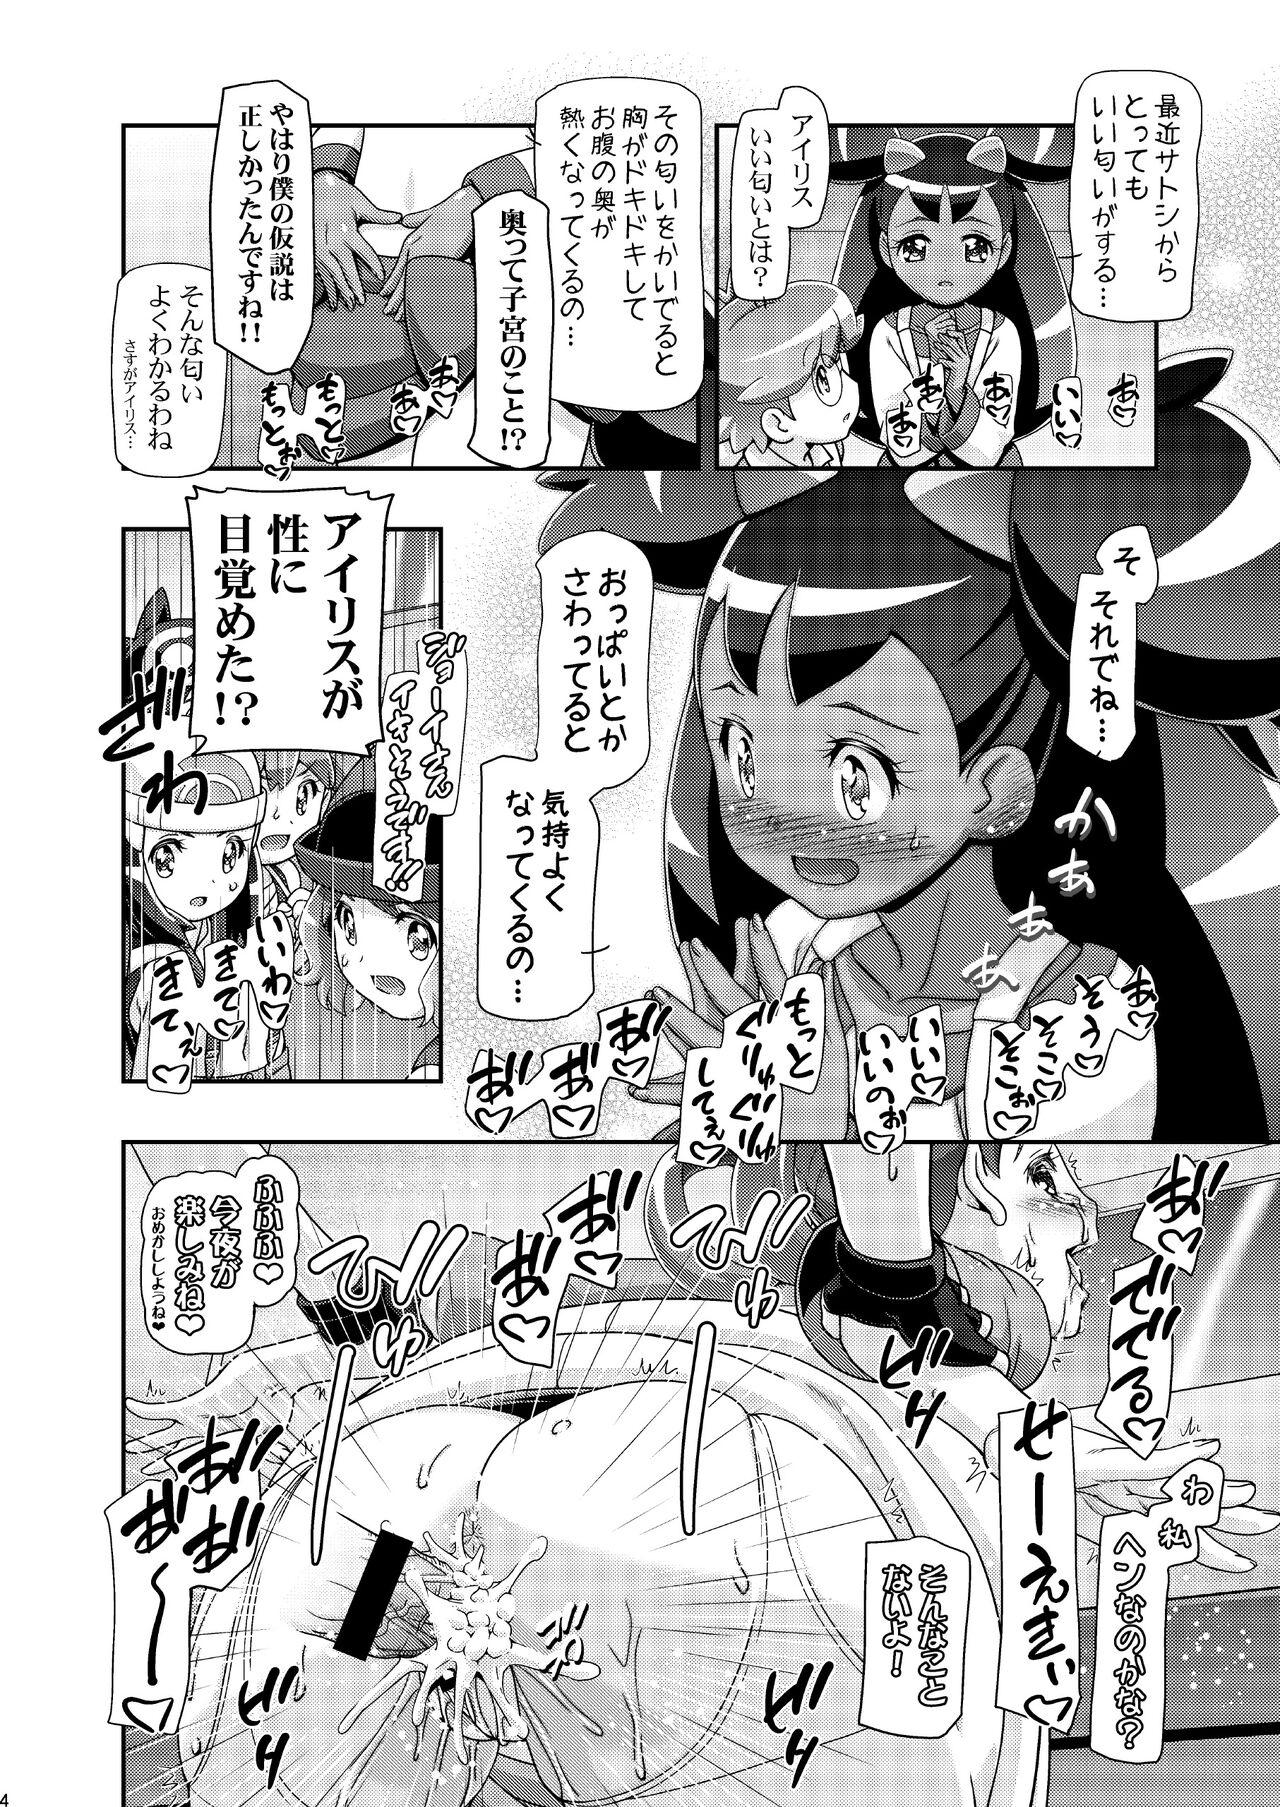 Hole PM GALS Iris no Turn!! - Pokemon | pocket monsters Les - Page 3